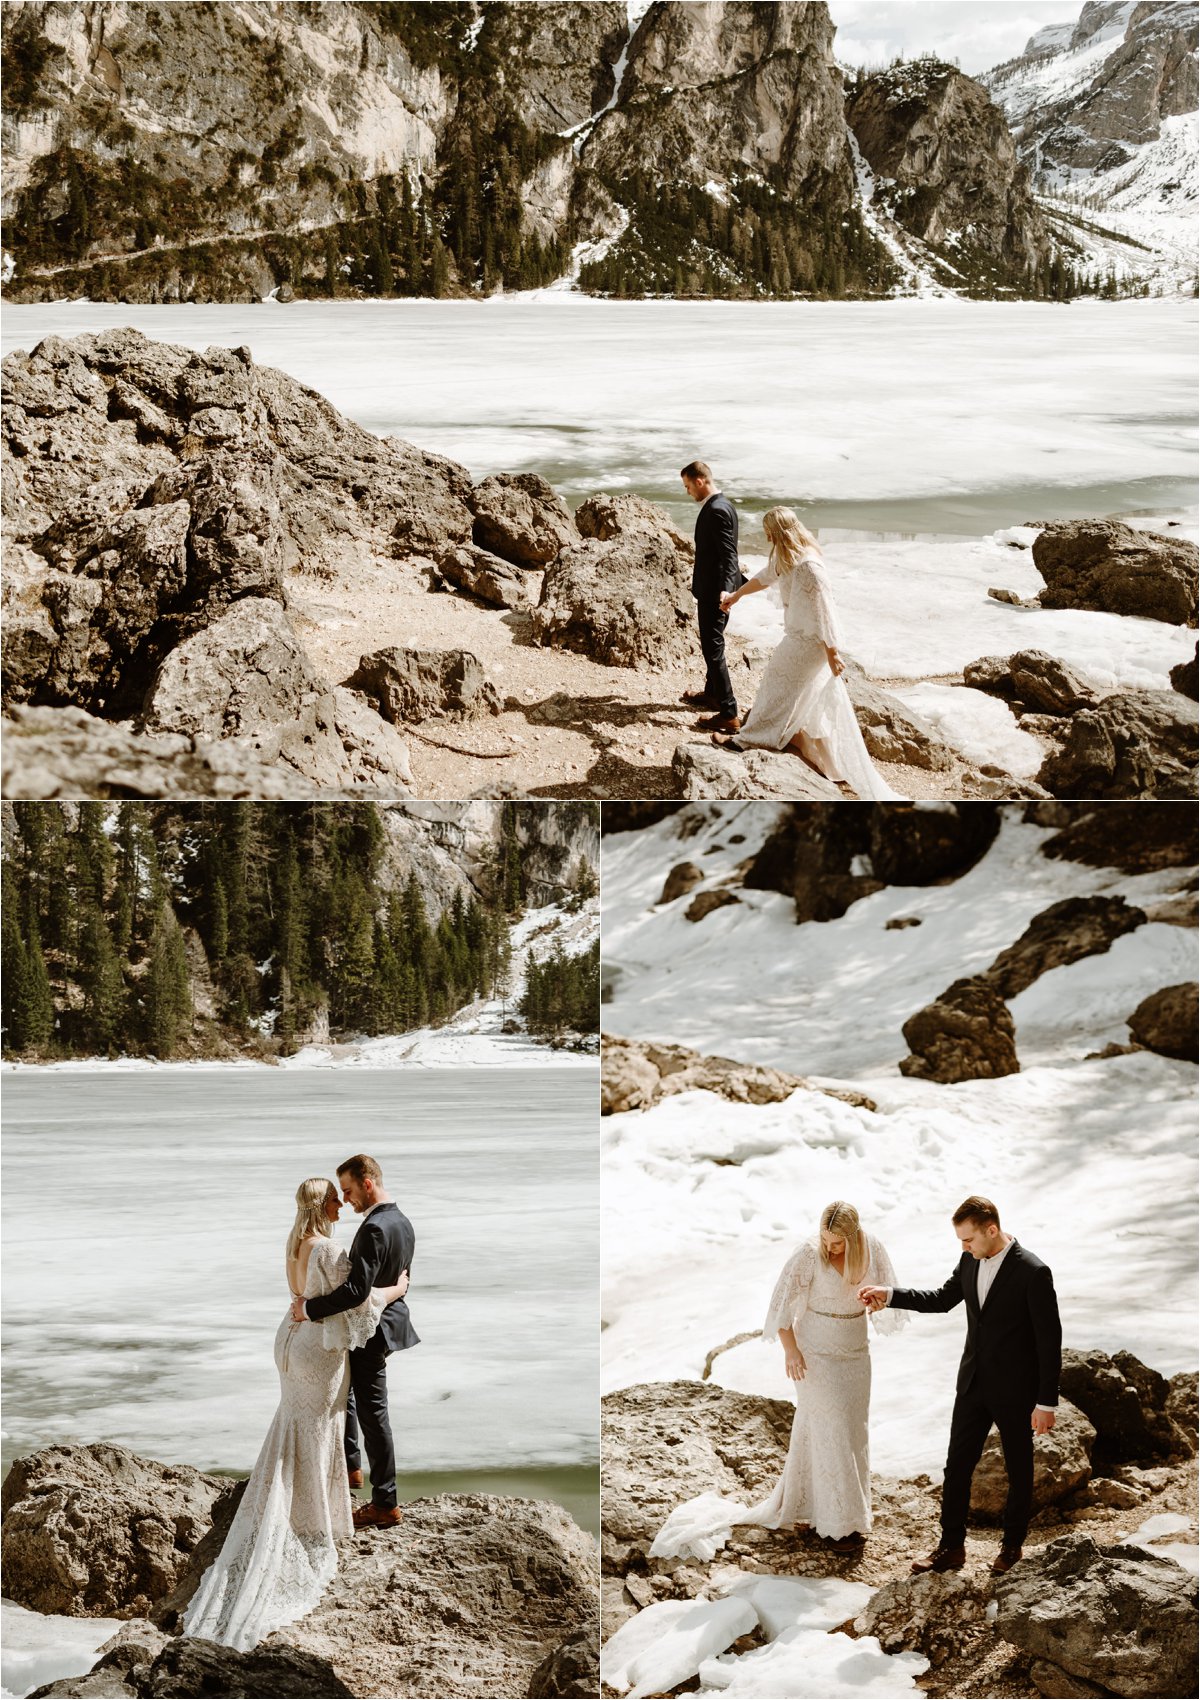 Erika & Nathan explore the shores of Lago di Braies in the Italian Alps for their elopement in the Dolomites. Photos by Wild Connections Photography